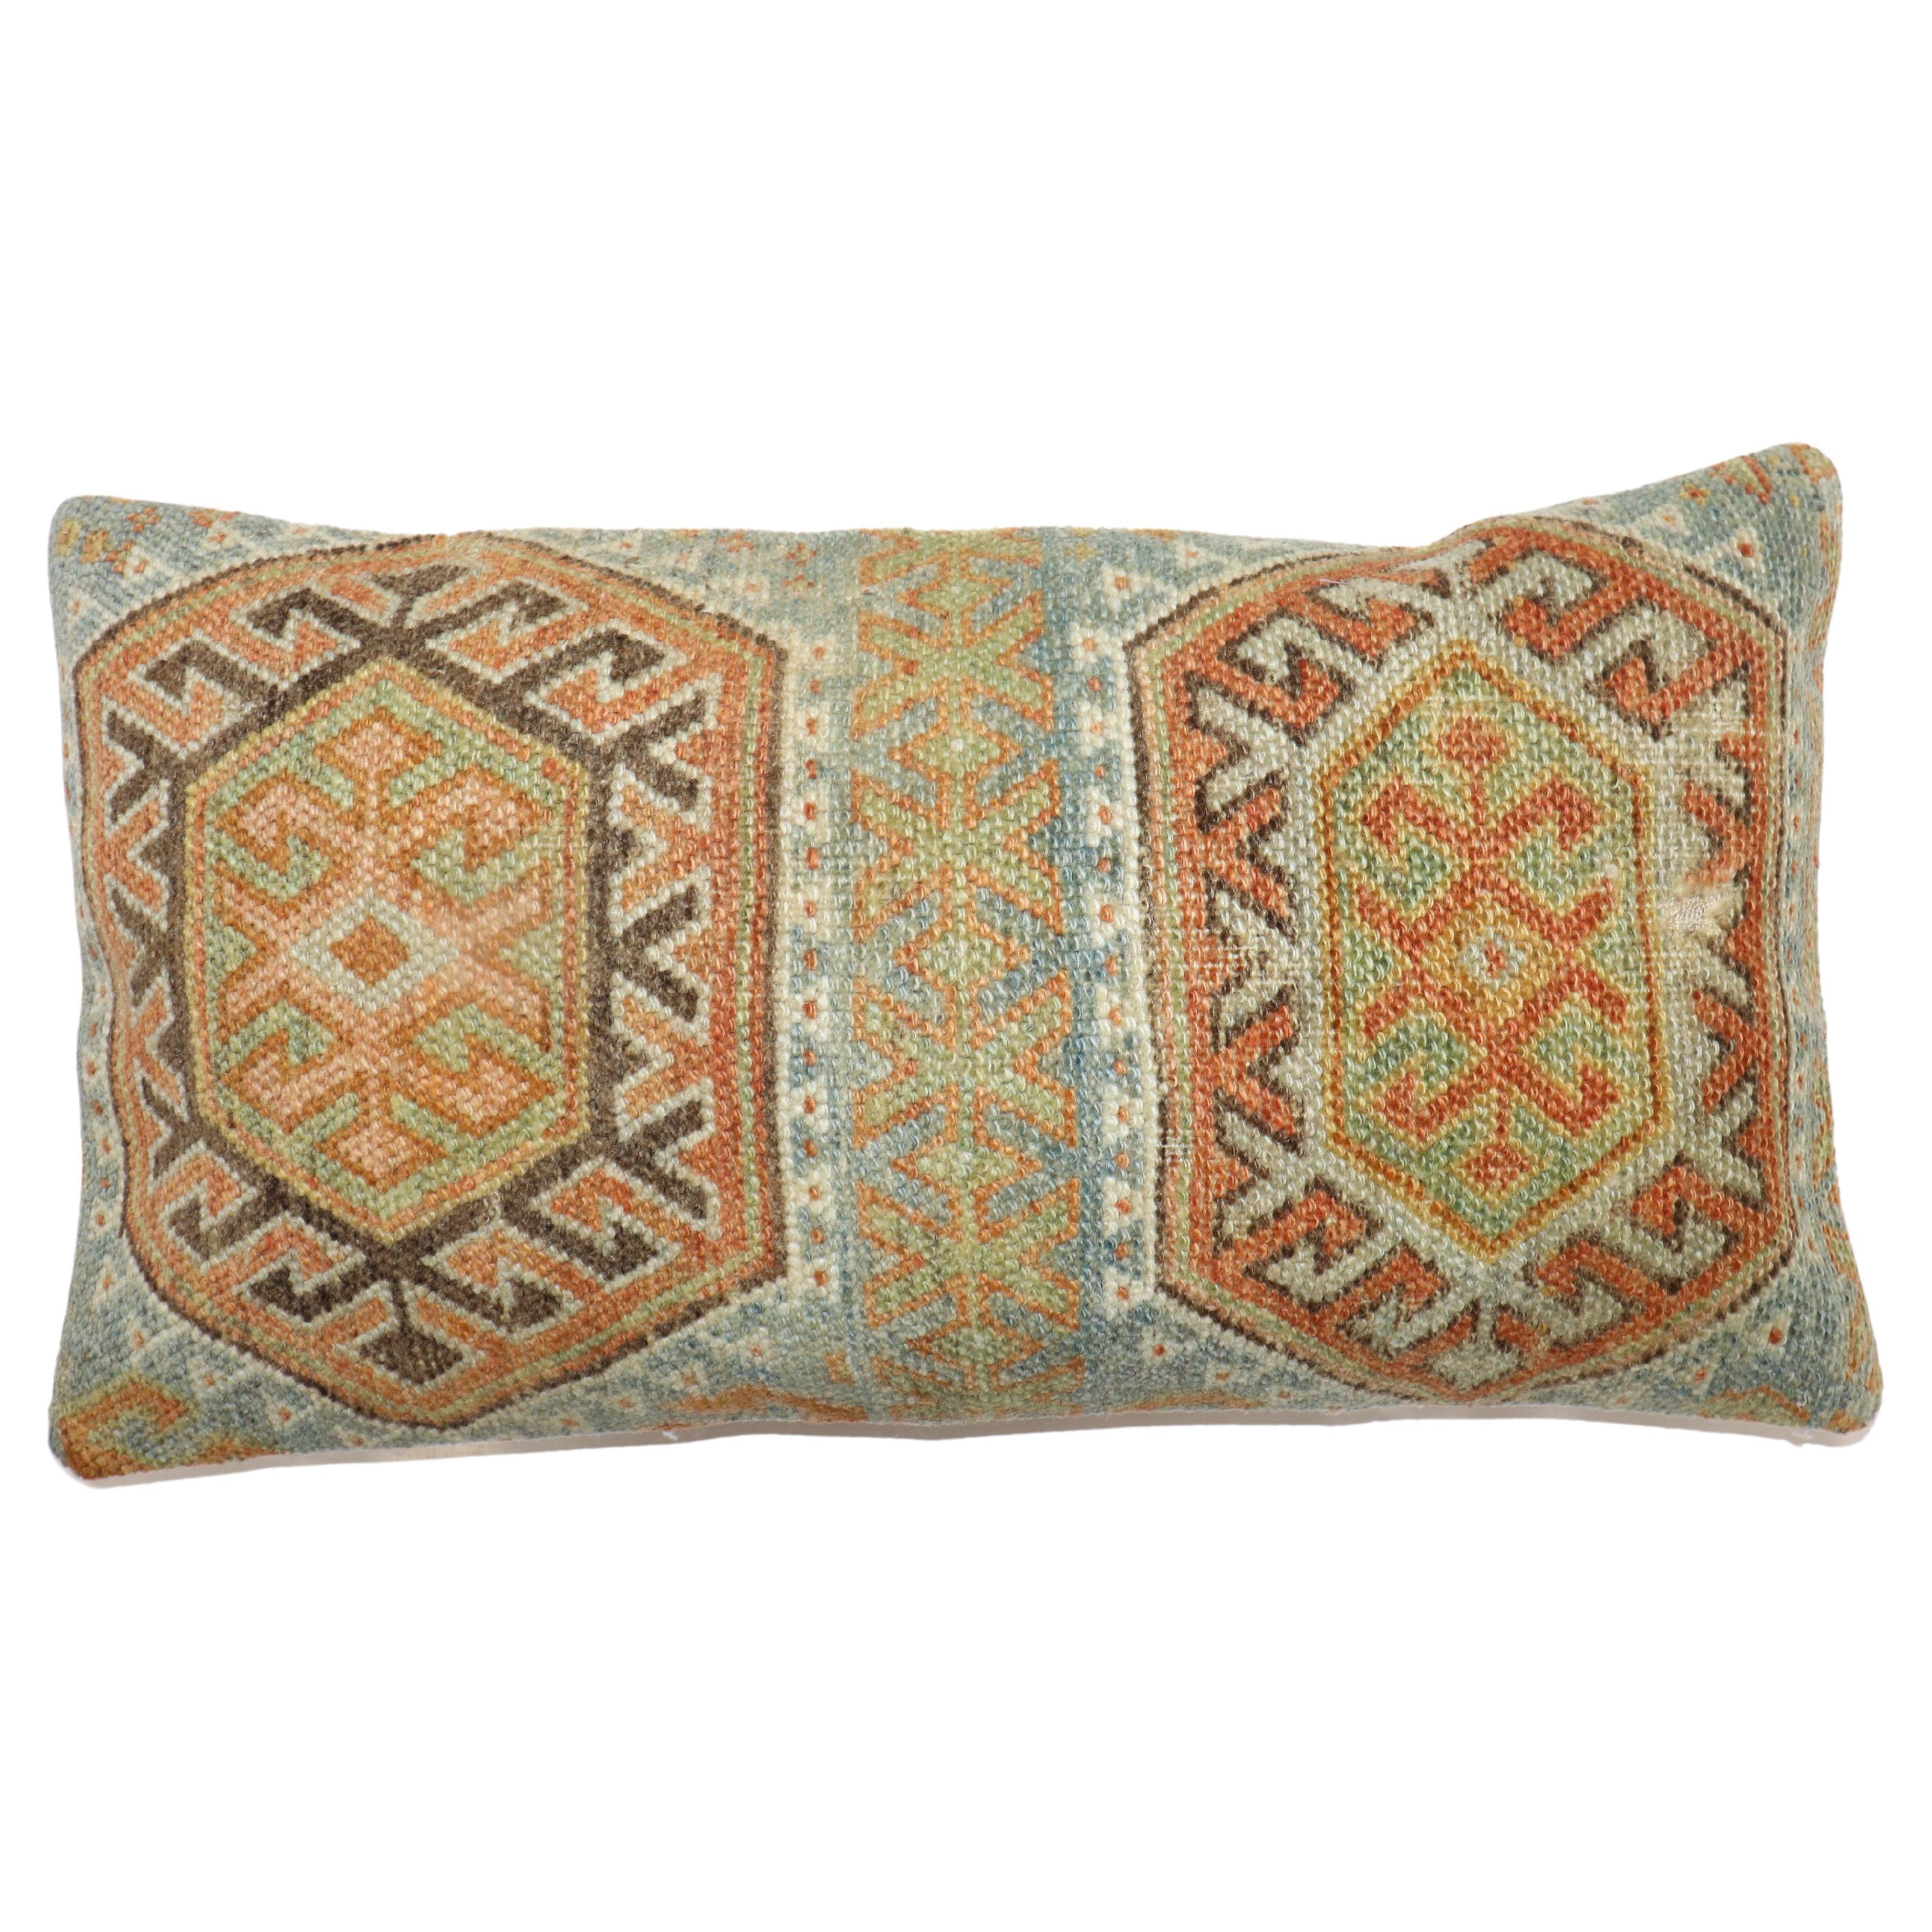 Large Bolster-size pillow made from a Persian Kurd rug. zipper closure and poly-fill insert provided.

Measures: 12'' x 23''.